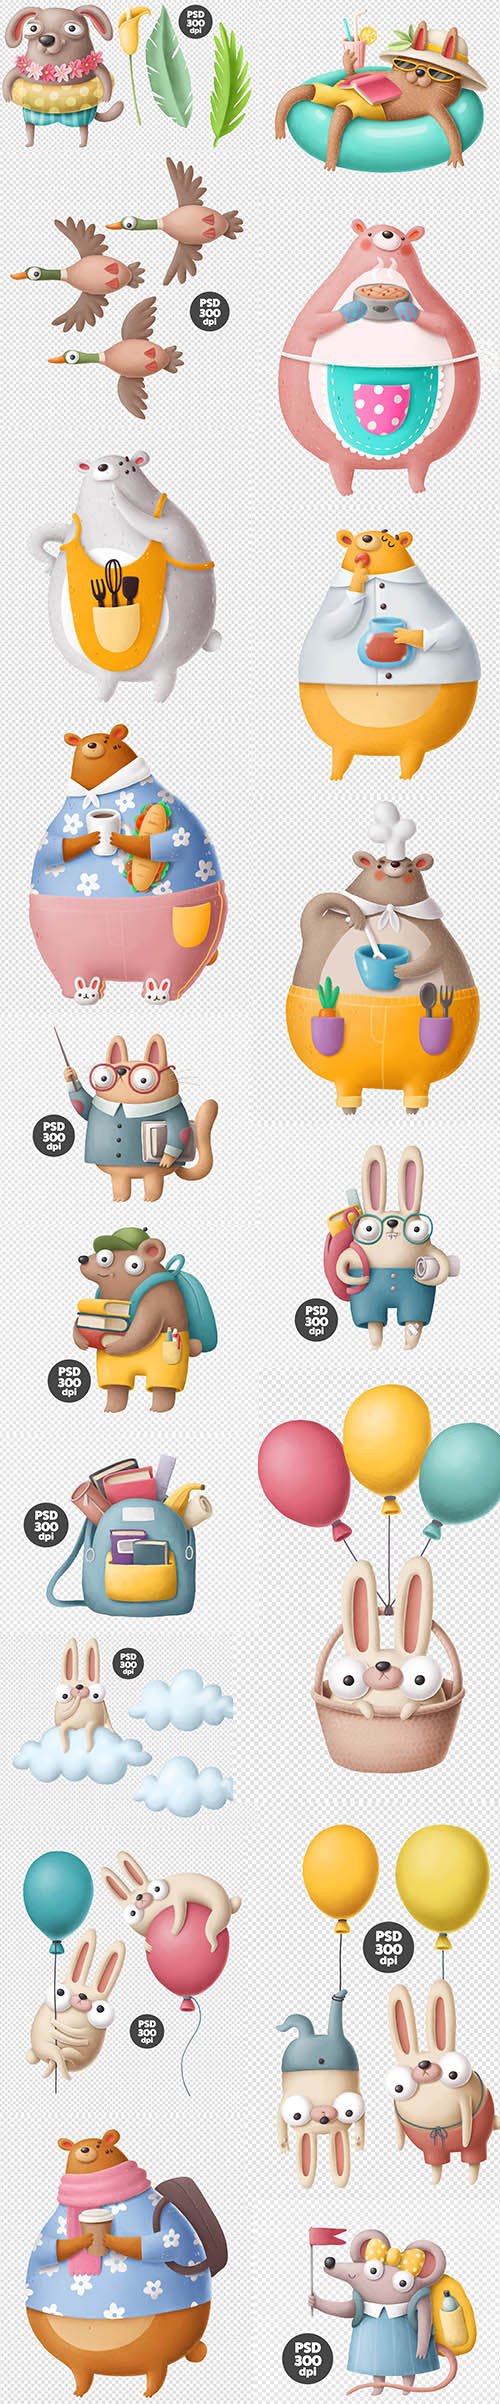 PSD Collection of Cute Animals and Object